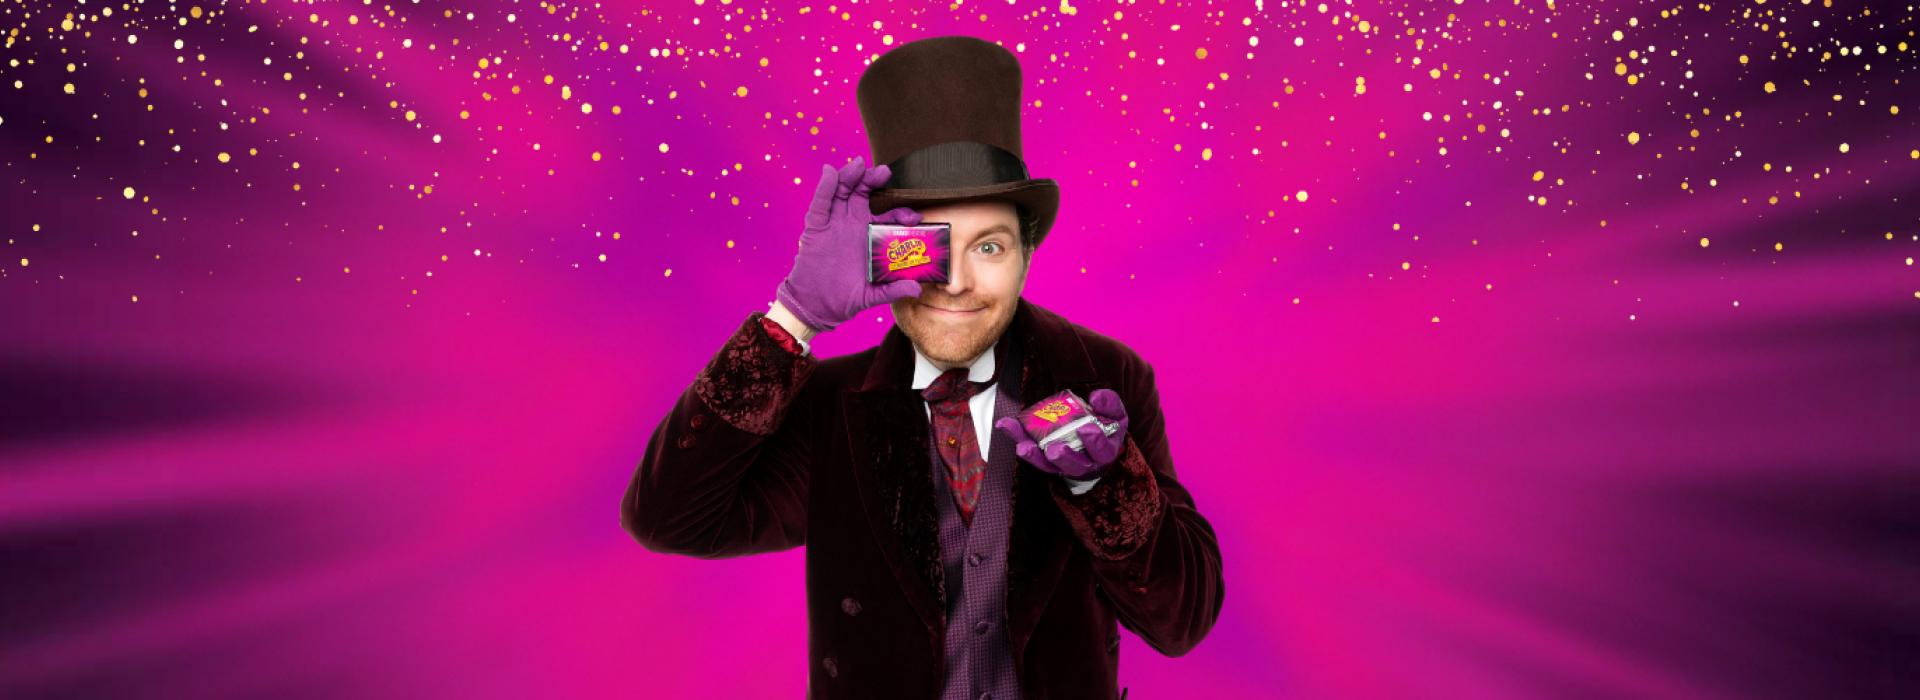 Mark Uhre as Willy Wonka holds up a chocolate bar, in front of a vibrant pink and purple background.